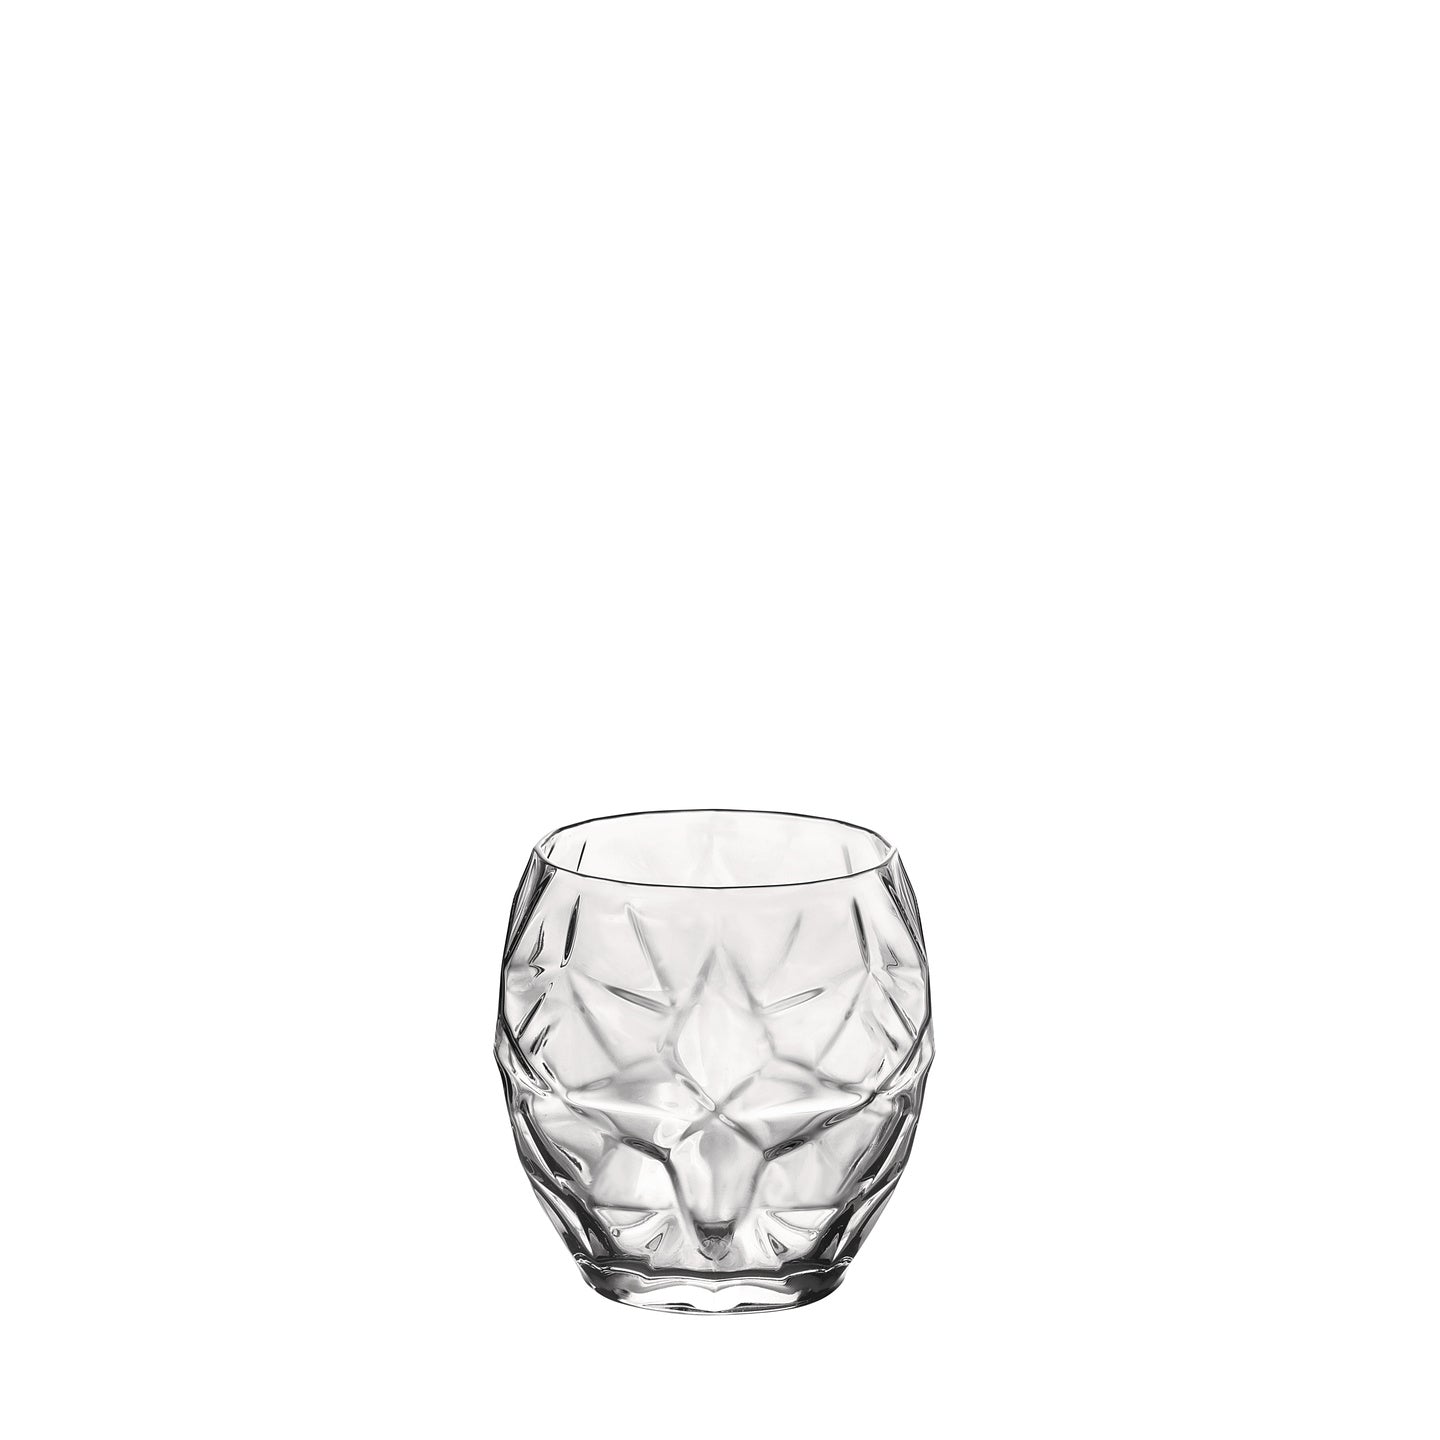 Oriente 13.5oz. Water Drinking Glasses (Set of 6)